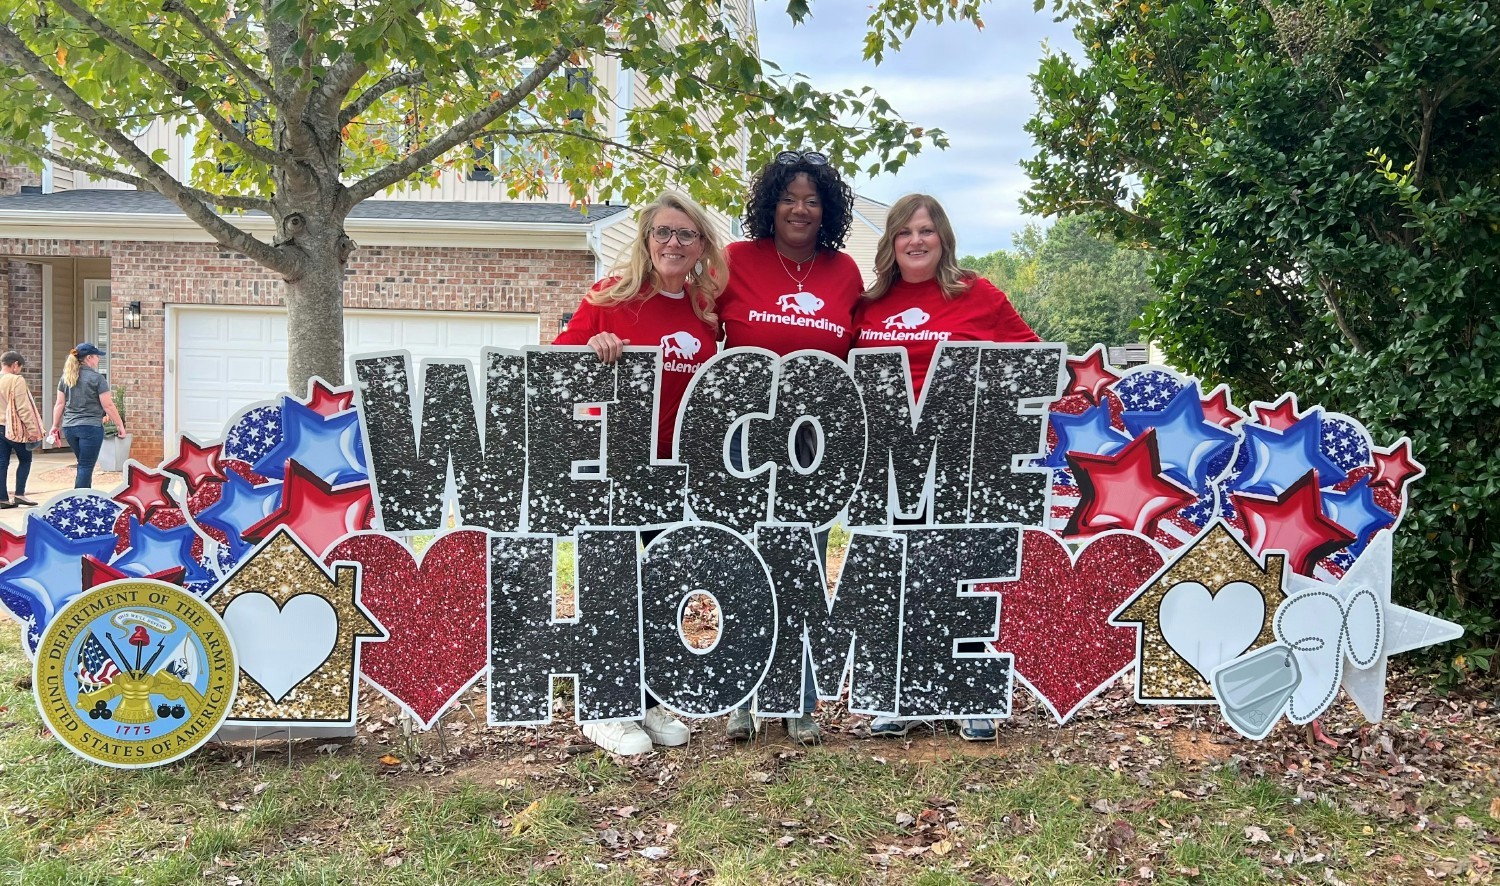 Our team helped transform a decorated Veteran and his family’s home for an episode of Lifetime TV's Military Makeover.